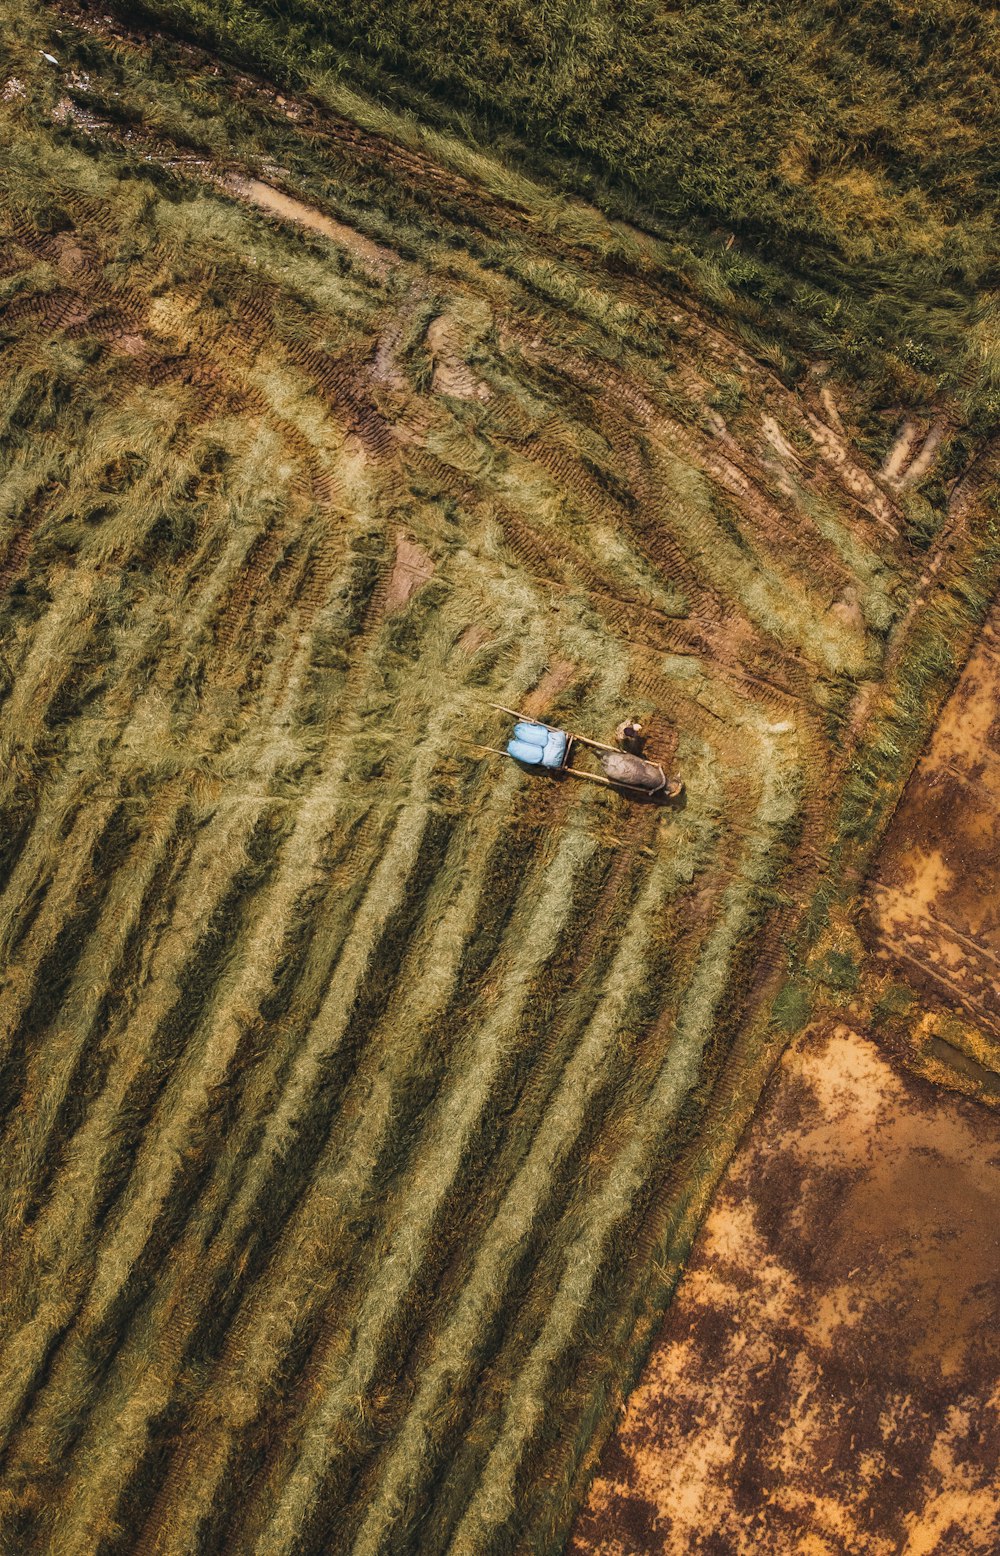 an aerial view of a farm field with a tractor